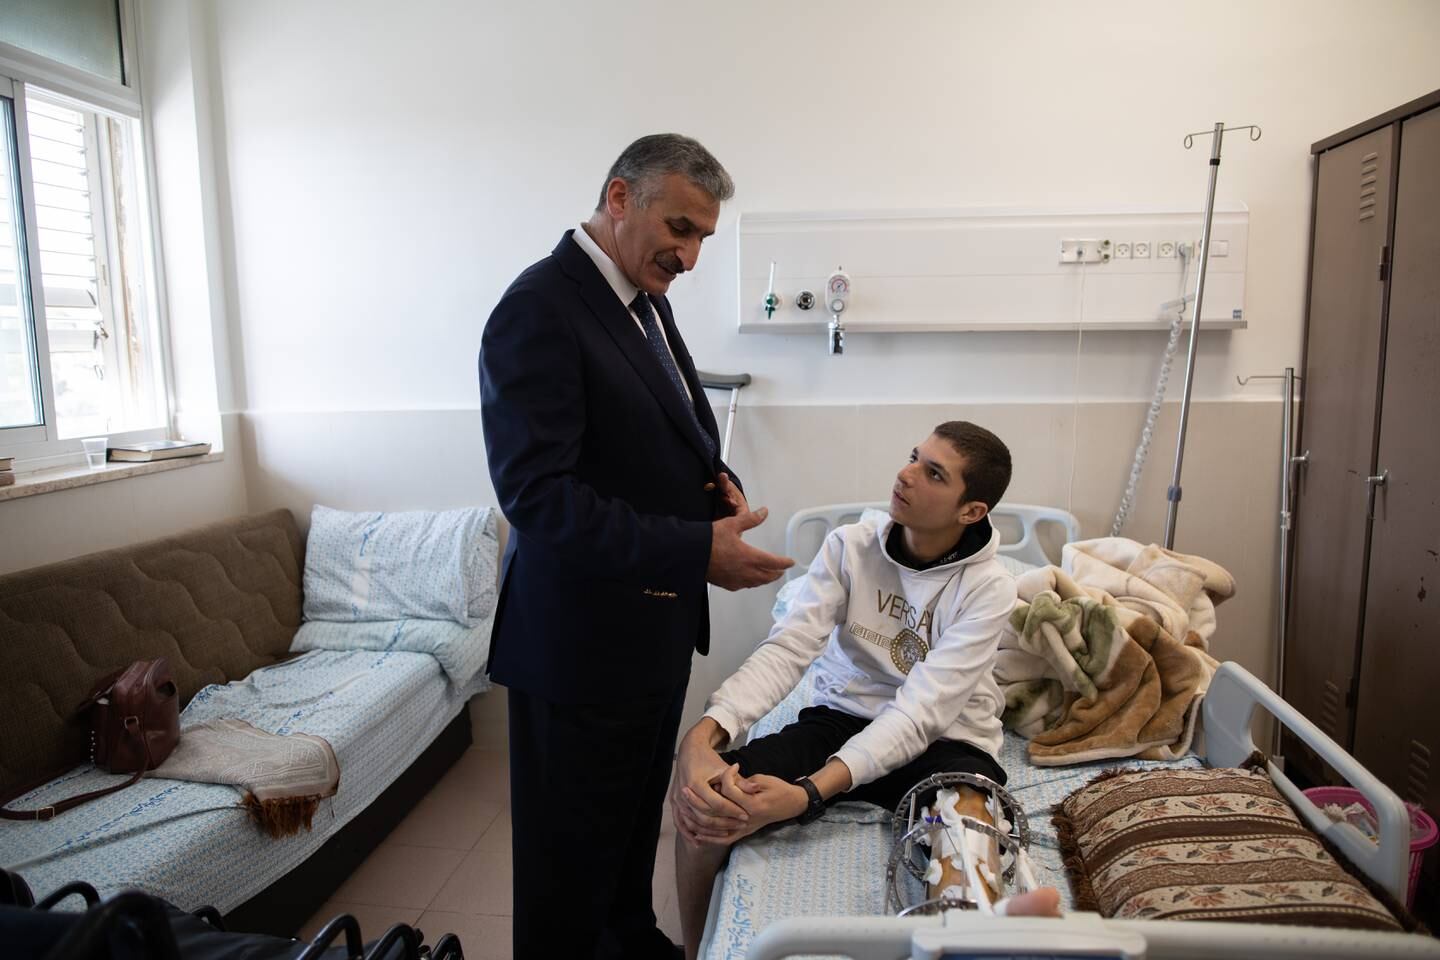 Dr Hussam Abu Saa, head of the orthopaedic department, speaks with a young patient. Corinna Kern for The National